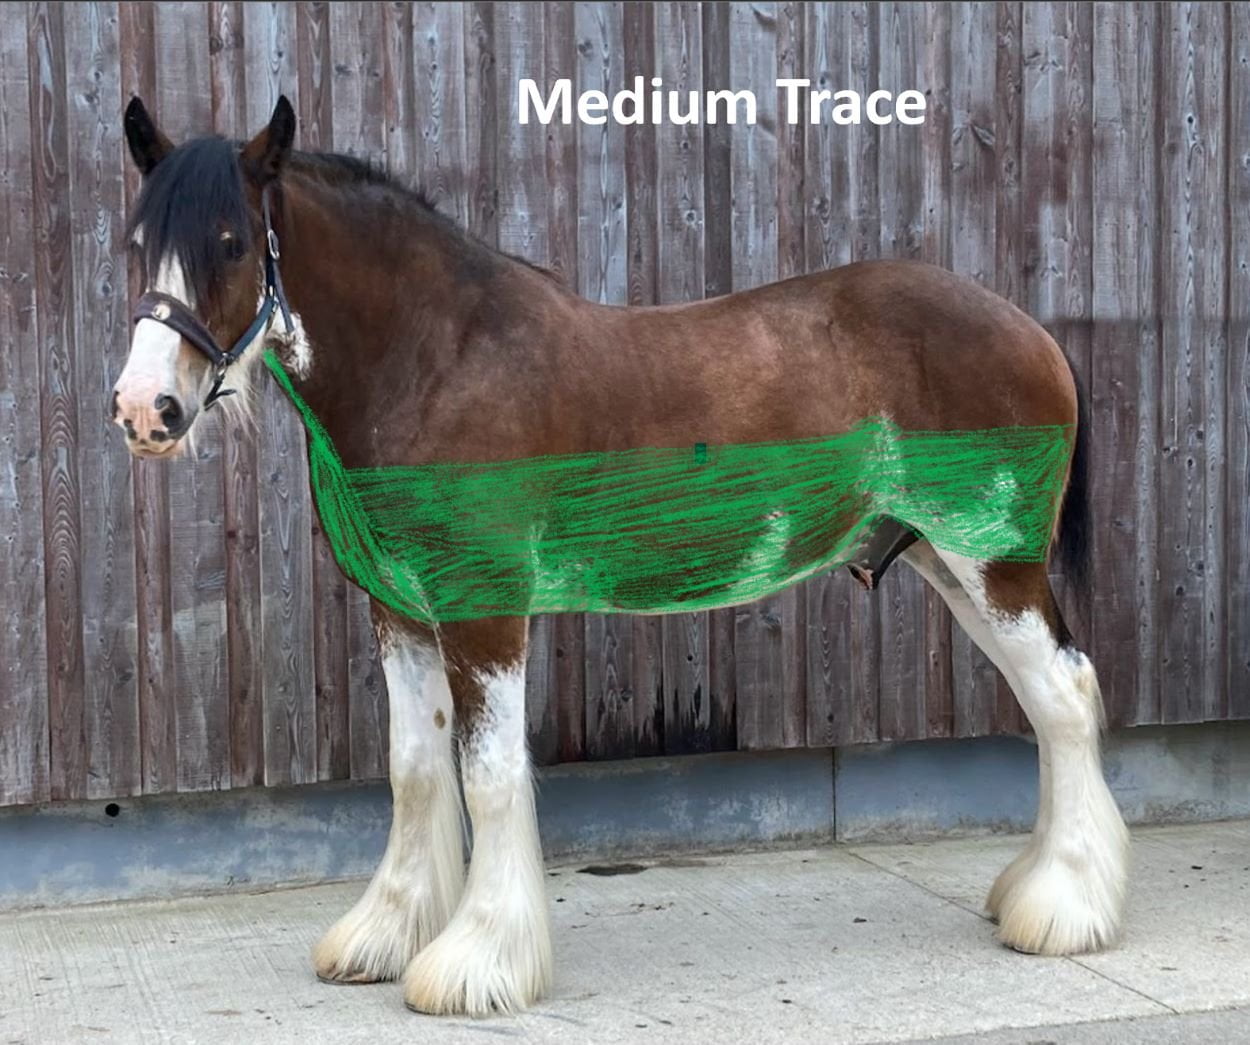 Clydesdale displaying a medium trace clip